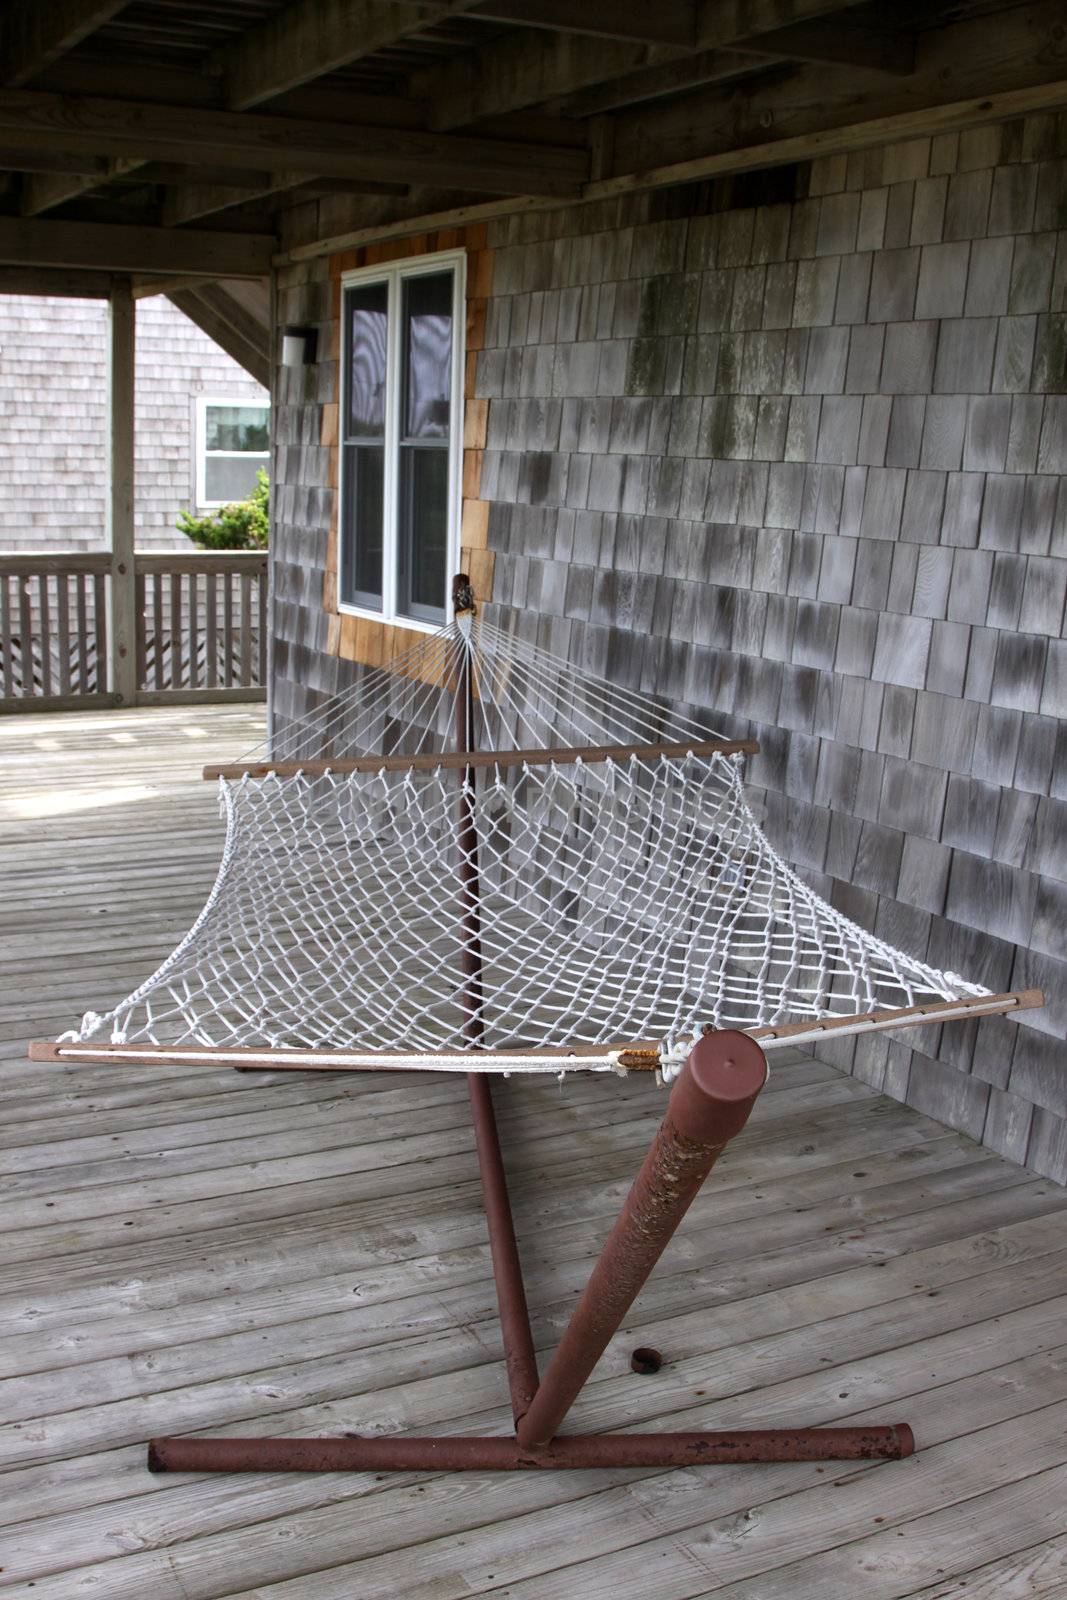 A hammock sitting on the deck of an Outer Banks beach house.
